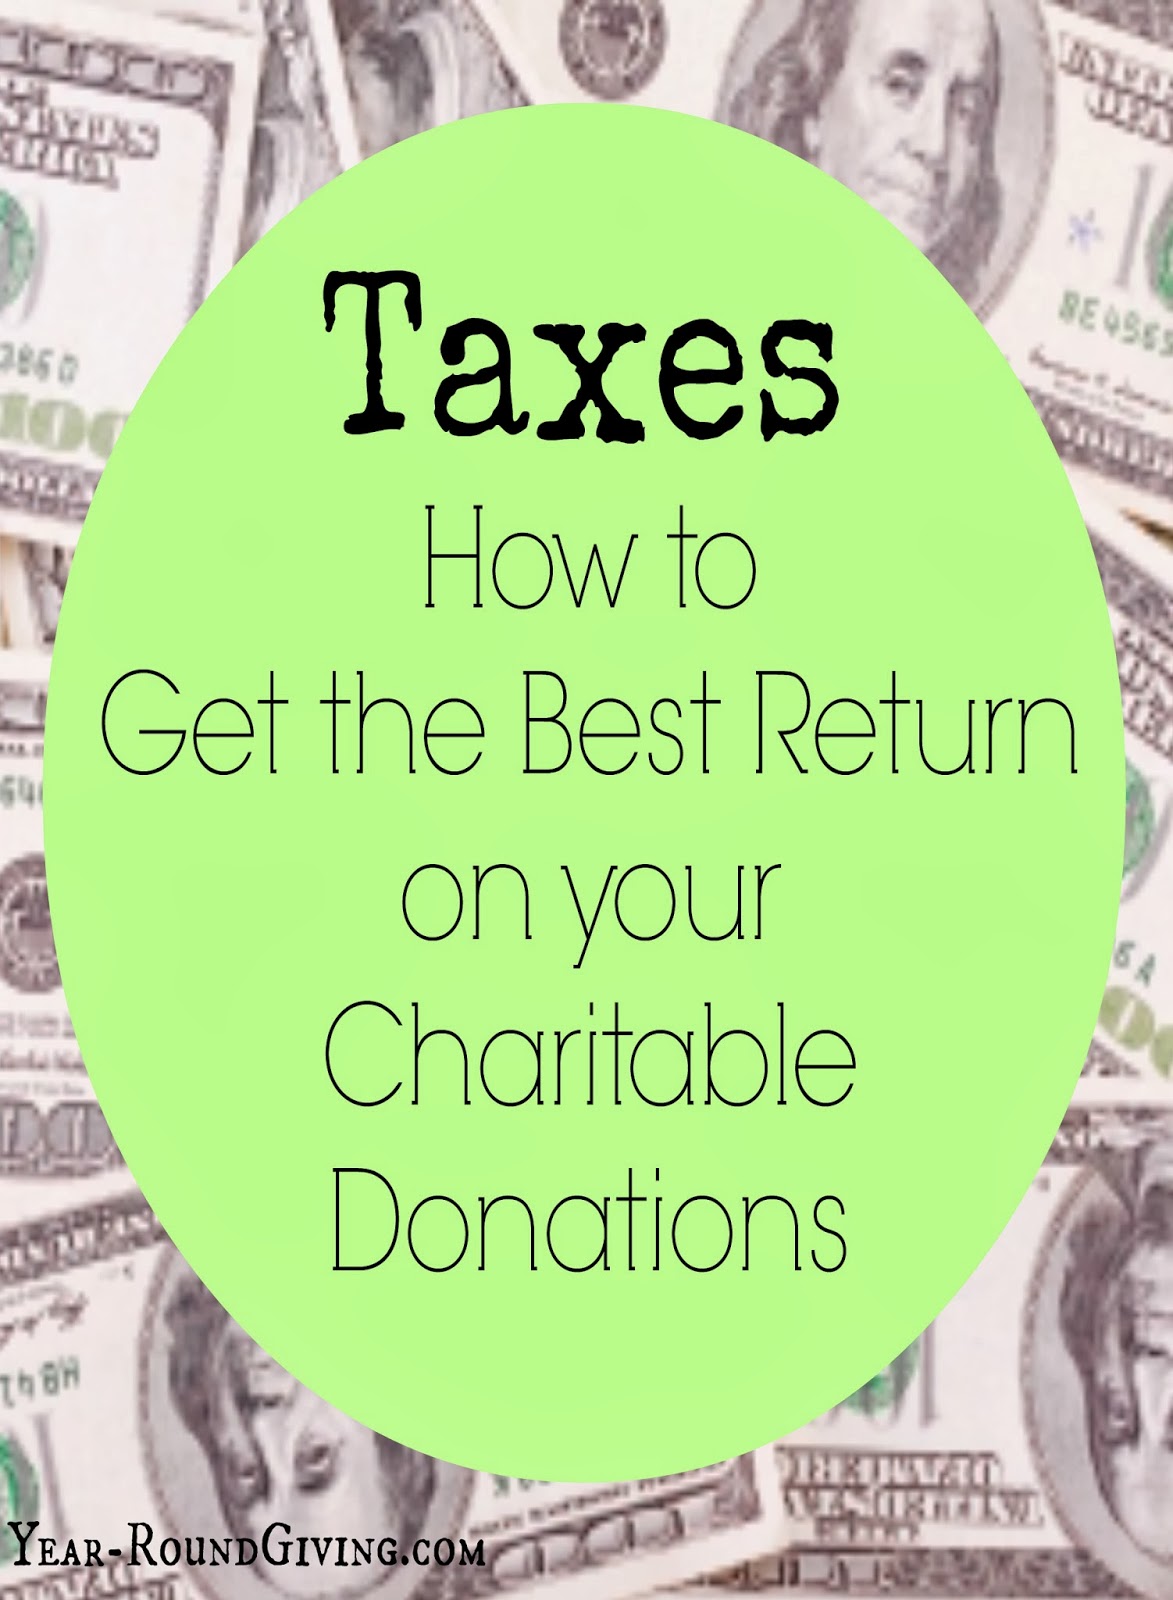 Taxes: How to get the most out of your charitable donations